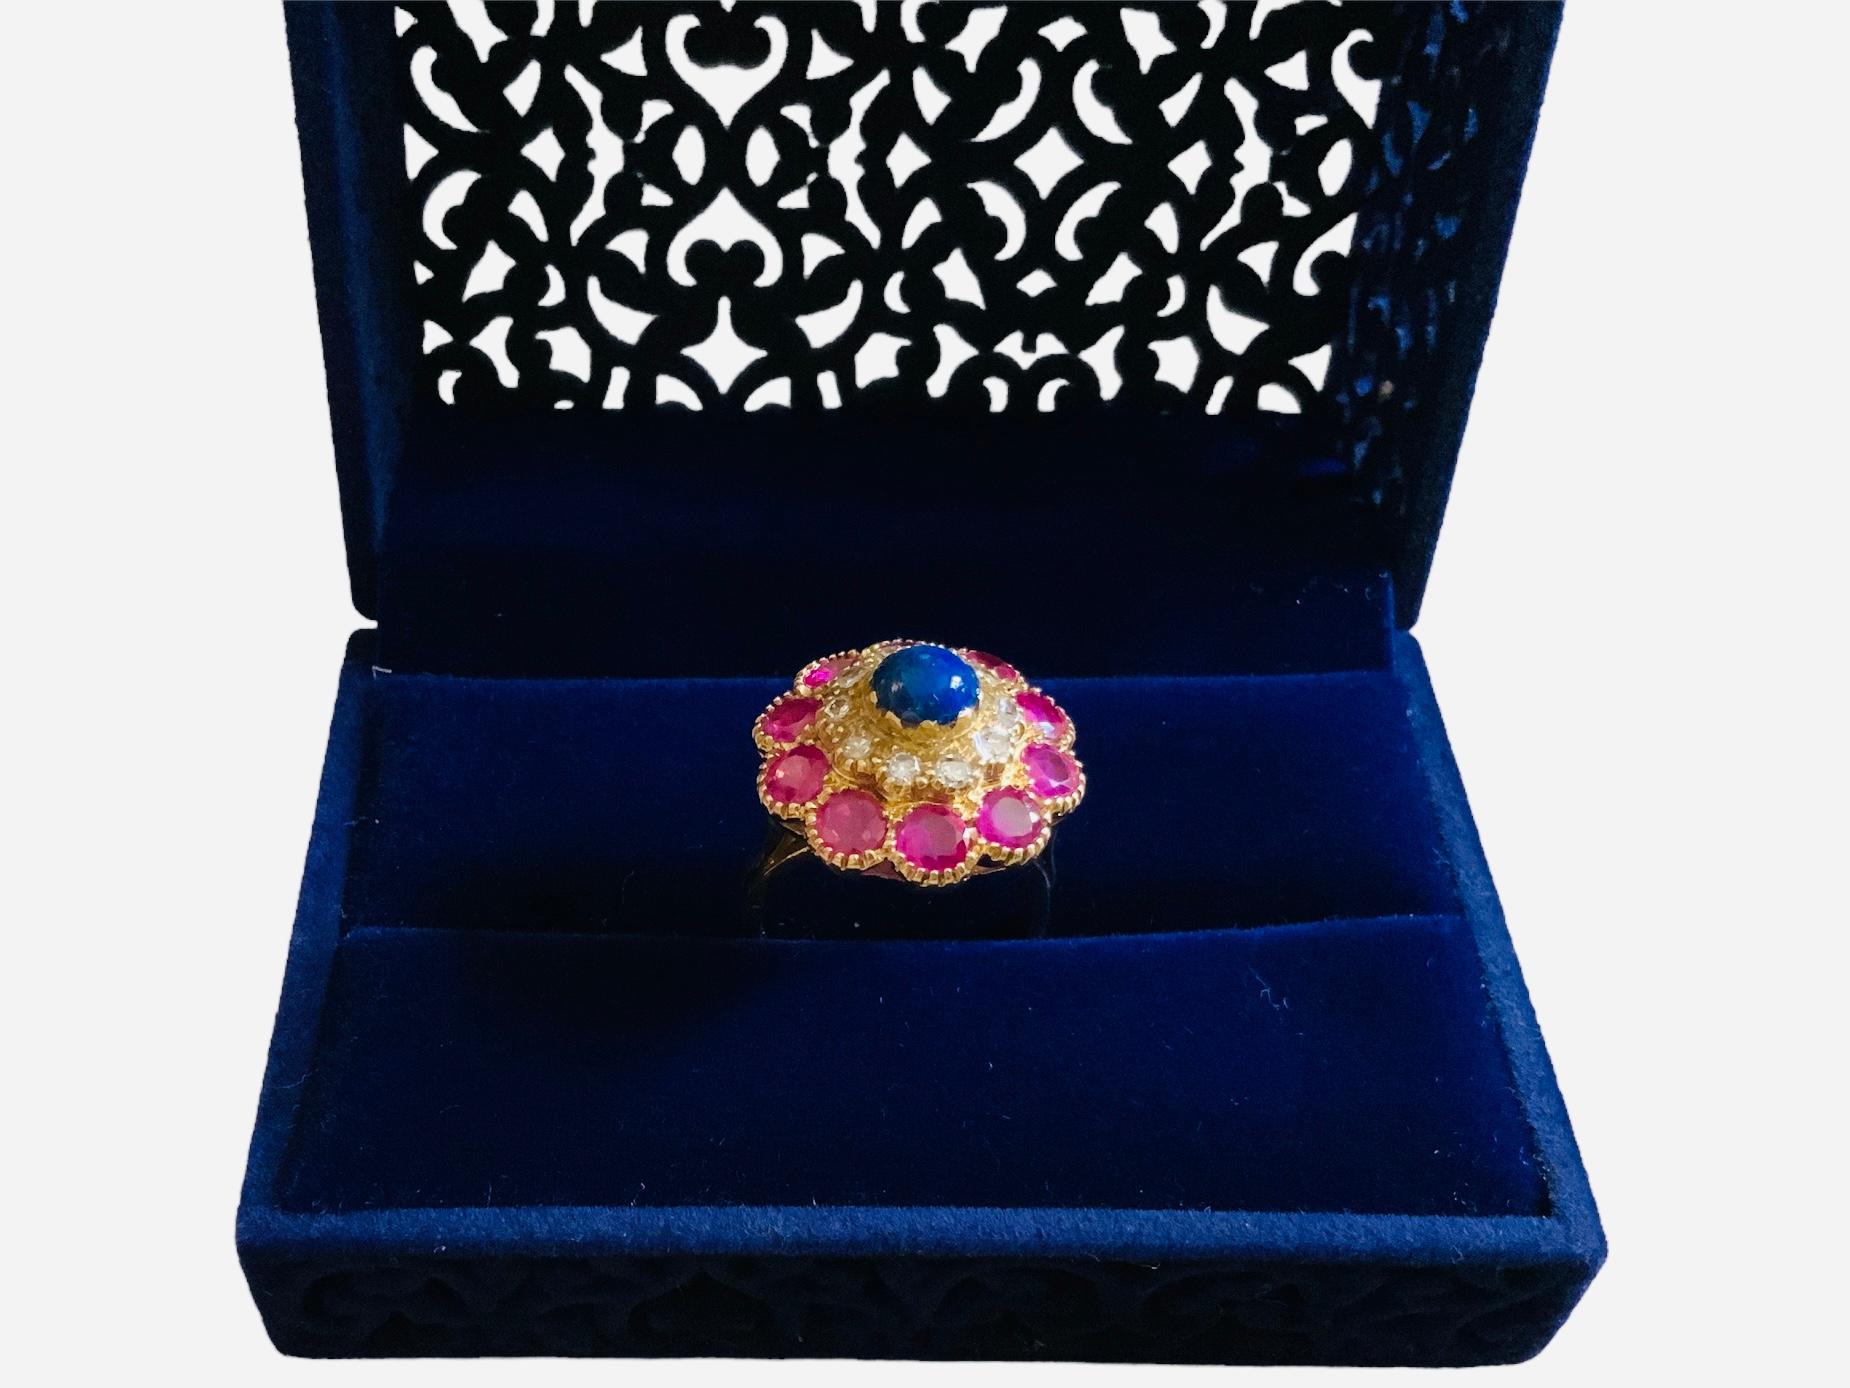 This is an 18K yellow gold diamonds, Lapis lazuli and rubies cocktail ring. The top of the ring forms a flower. This one is made of an external large halo of ten round cut and faceted rubies in prong setting followed by a small halo of ten round cut